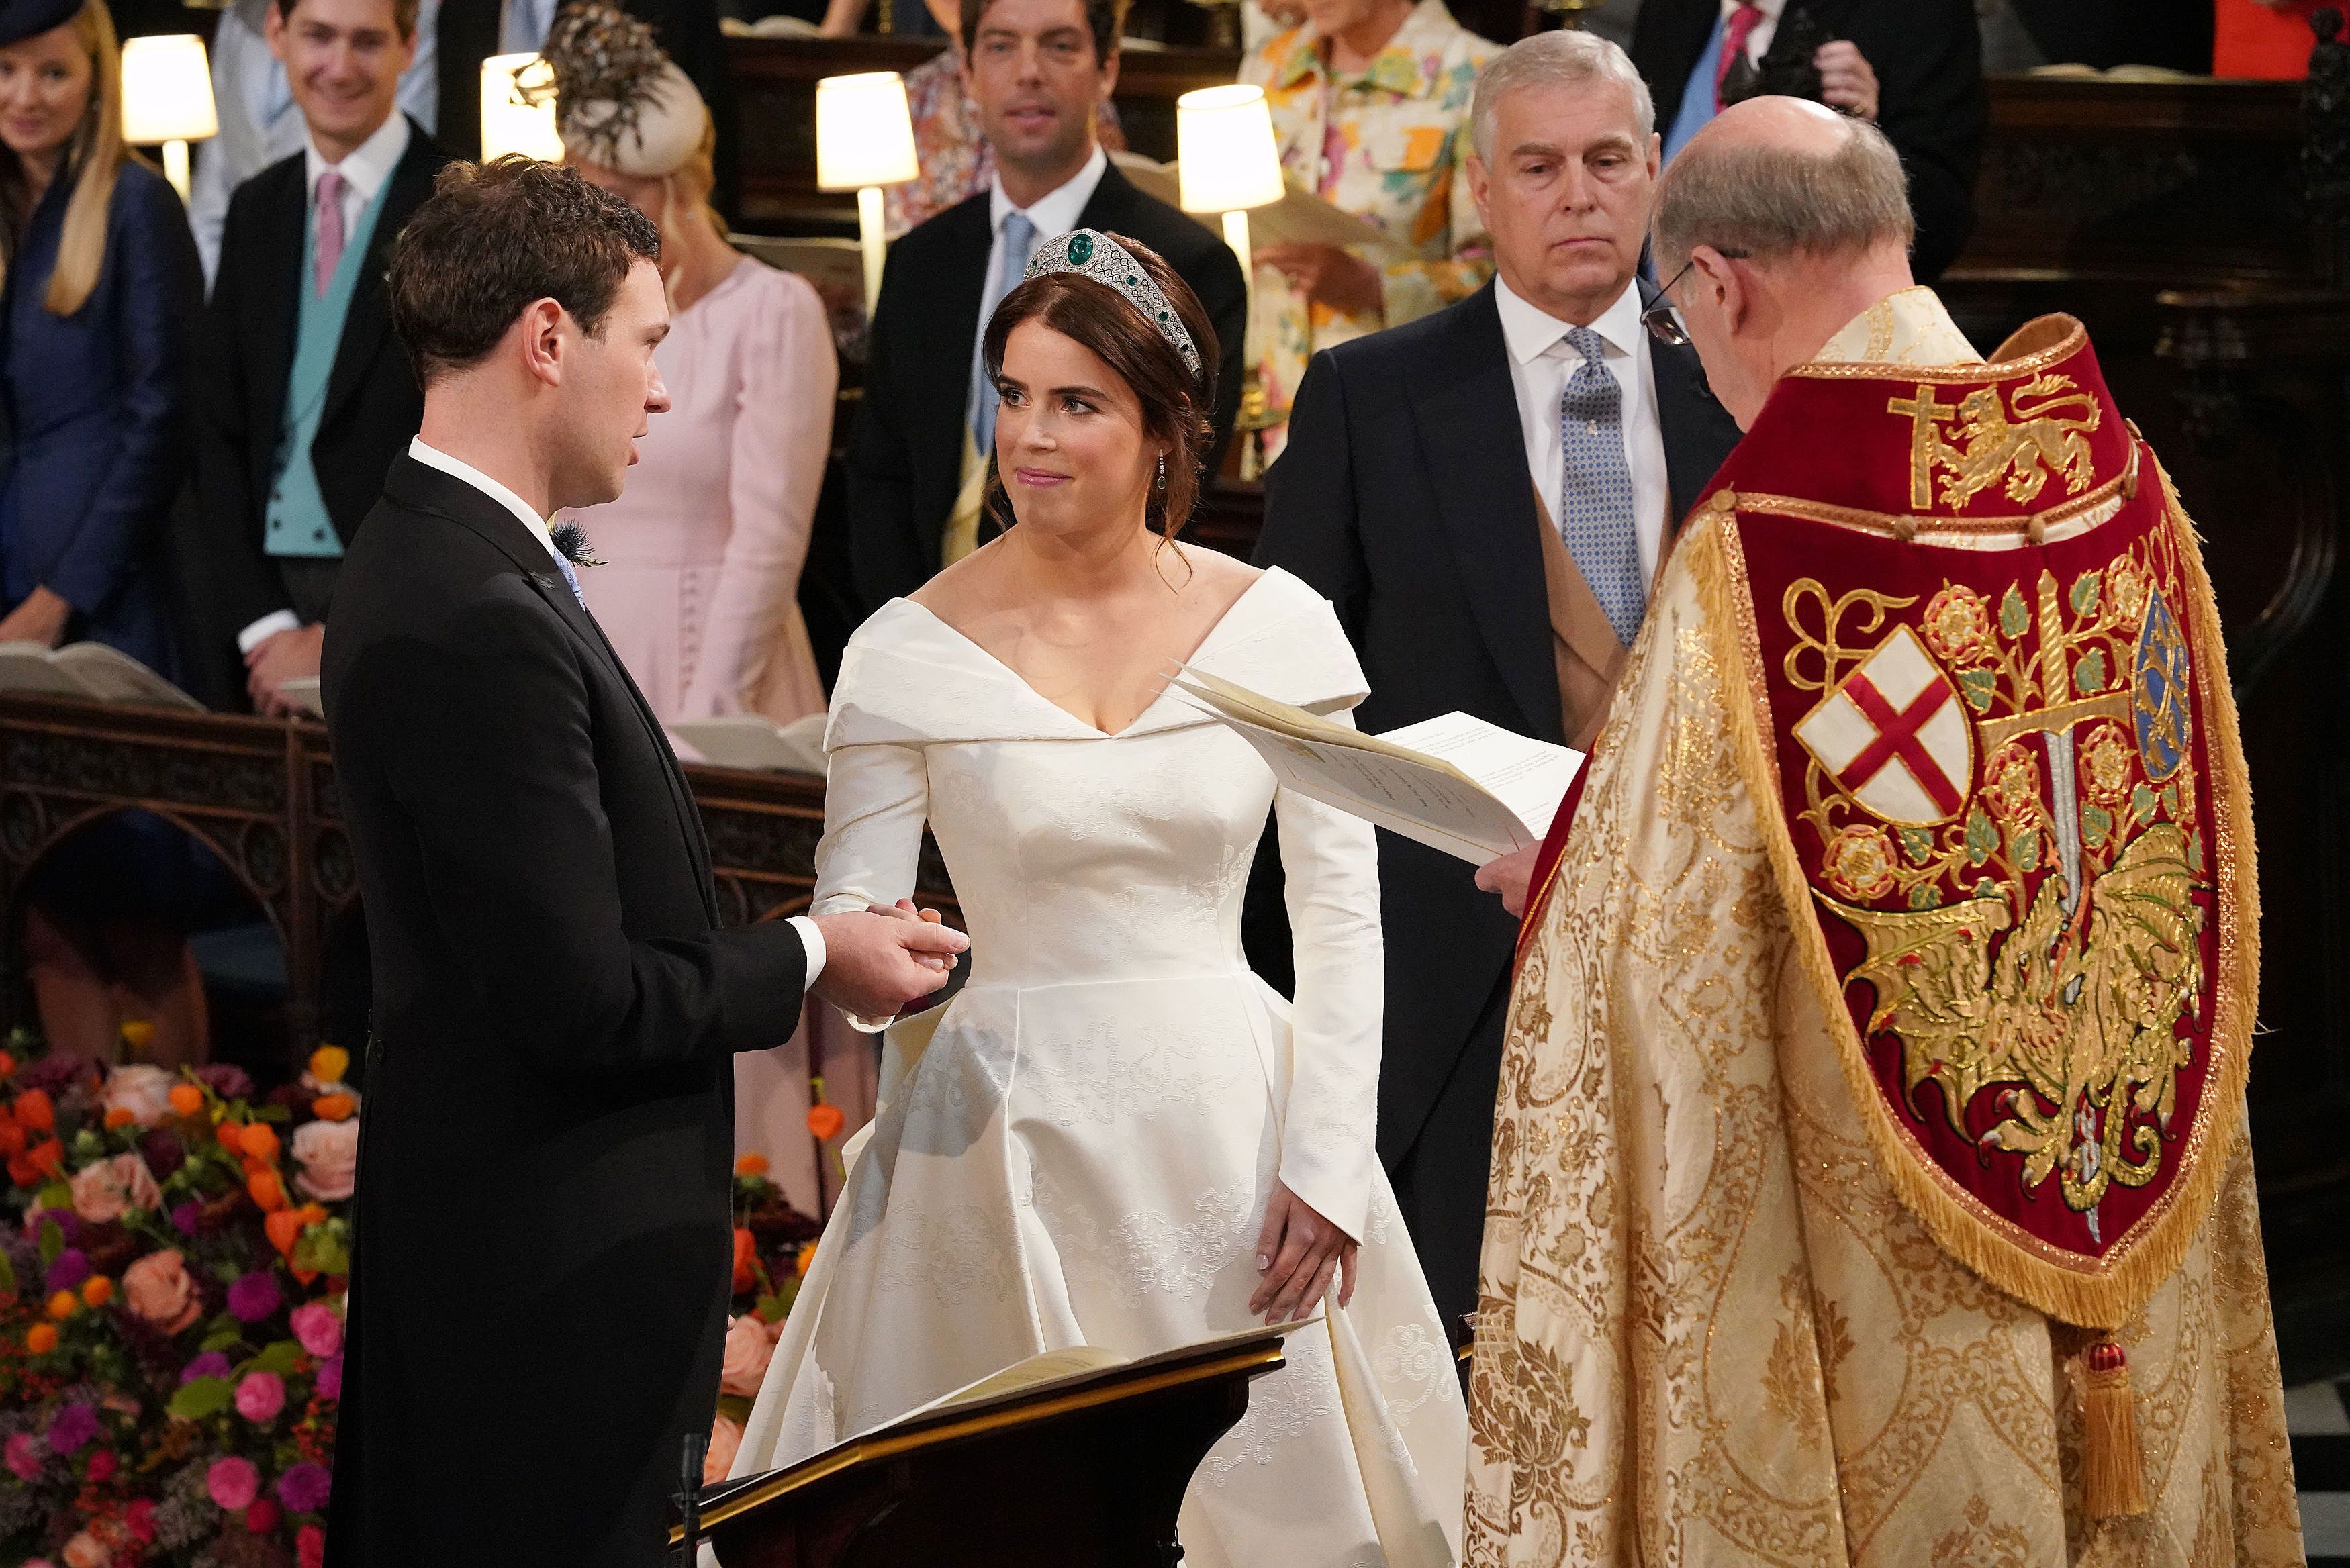 Jack Brooksbank Said The Sweetest Thing As Princess Eugenie Walked Down The Aisle At Royal Wedding